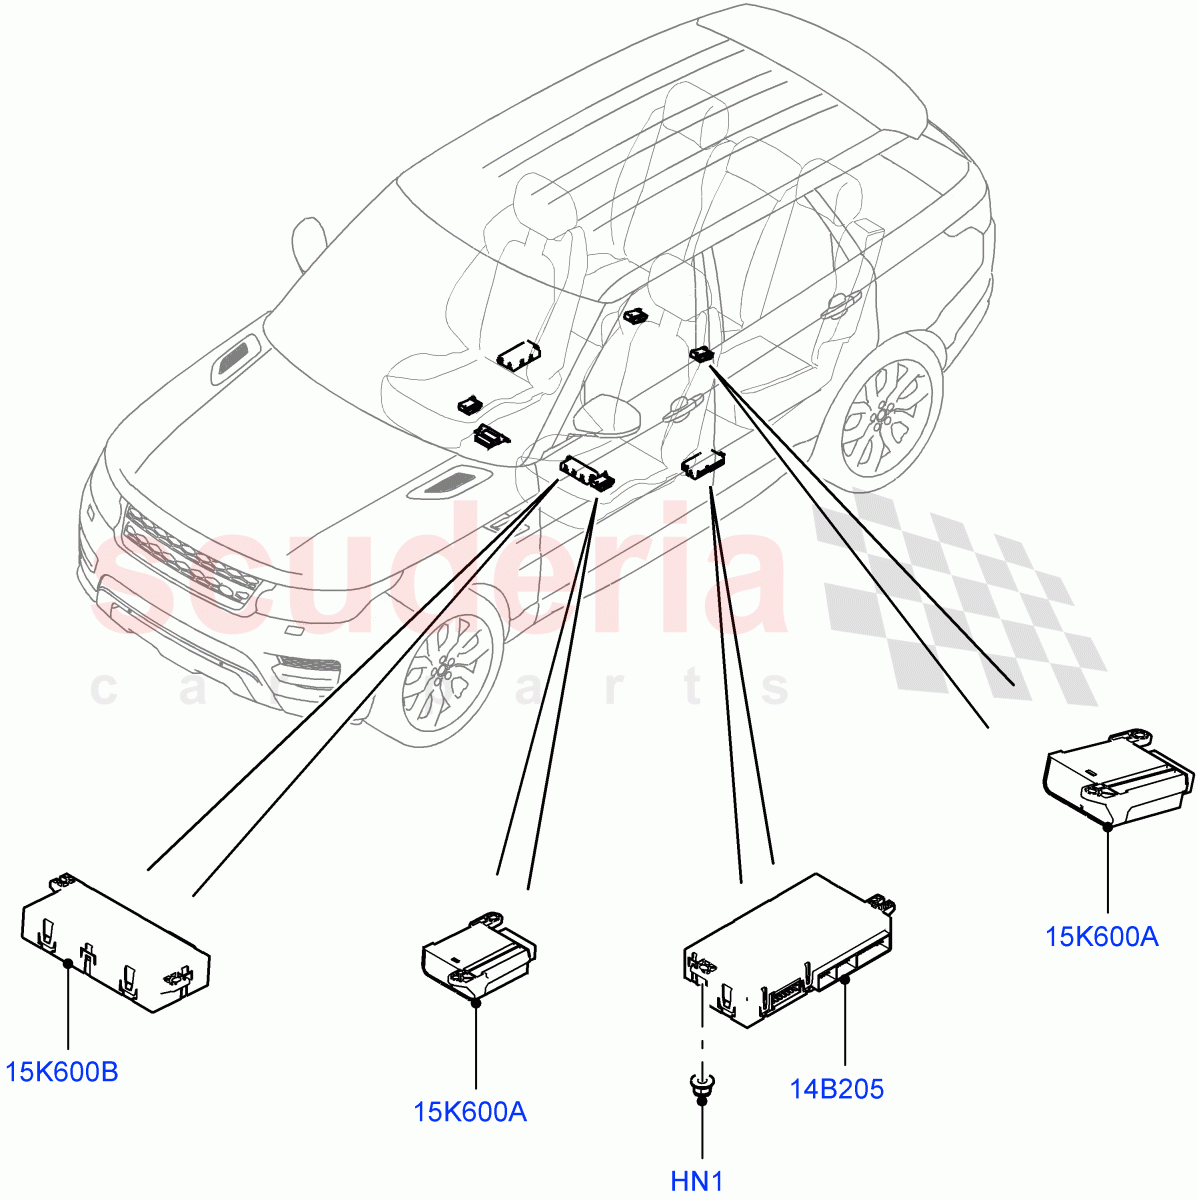 Vehicle Modules And Sensors(Seats) of Land Rover Land Rover Range Rover Sport (2014+) [4.4 DOHC Diesel V8 DITC]